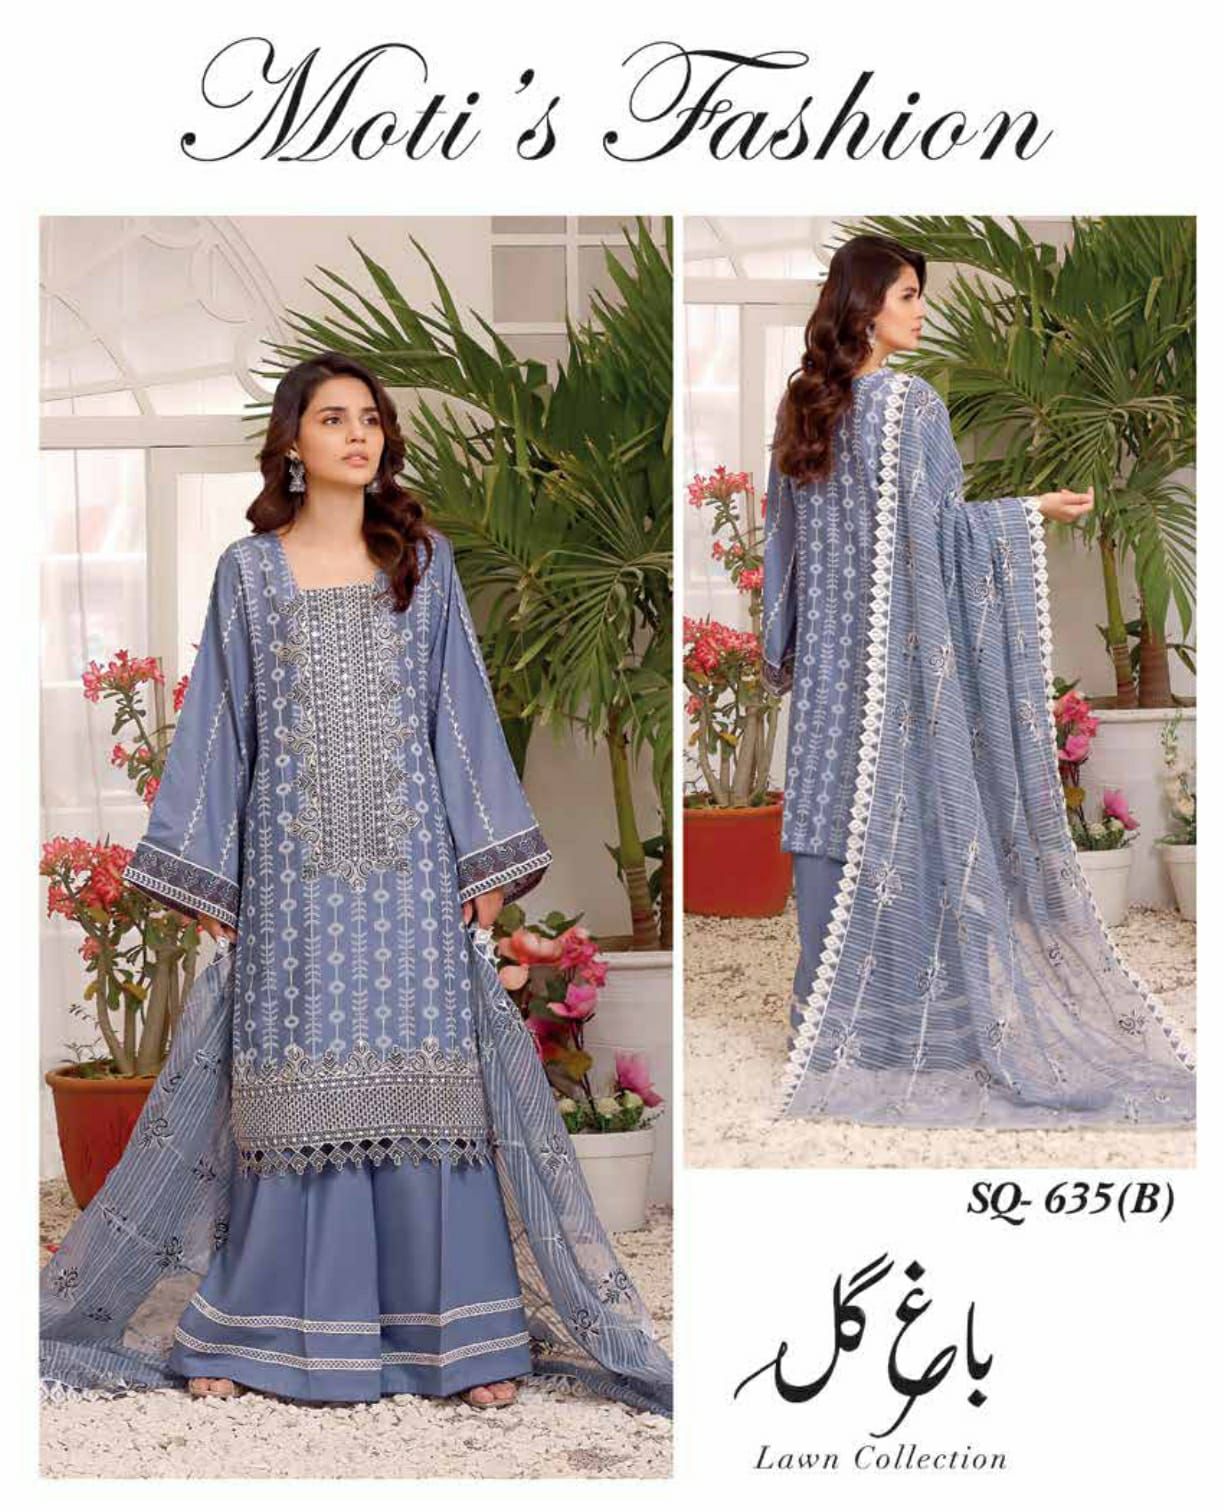 Motis Fashion Bagh E Gul Lawn Collection Semi Stitched Dress Material Catalog Lowest Price